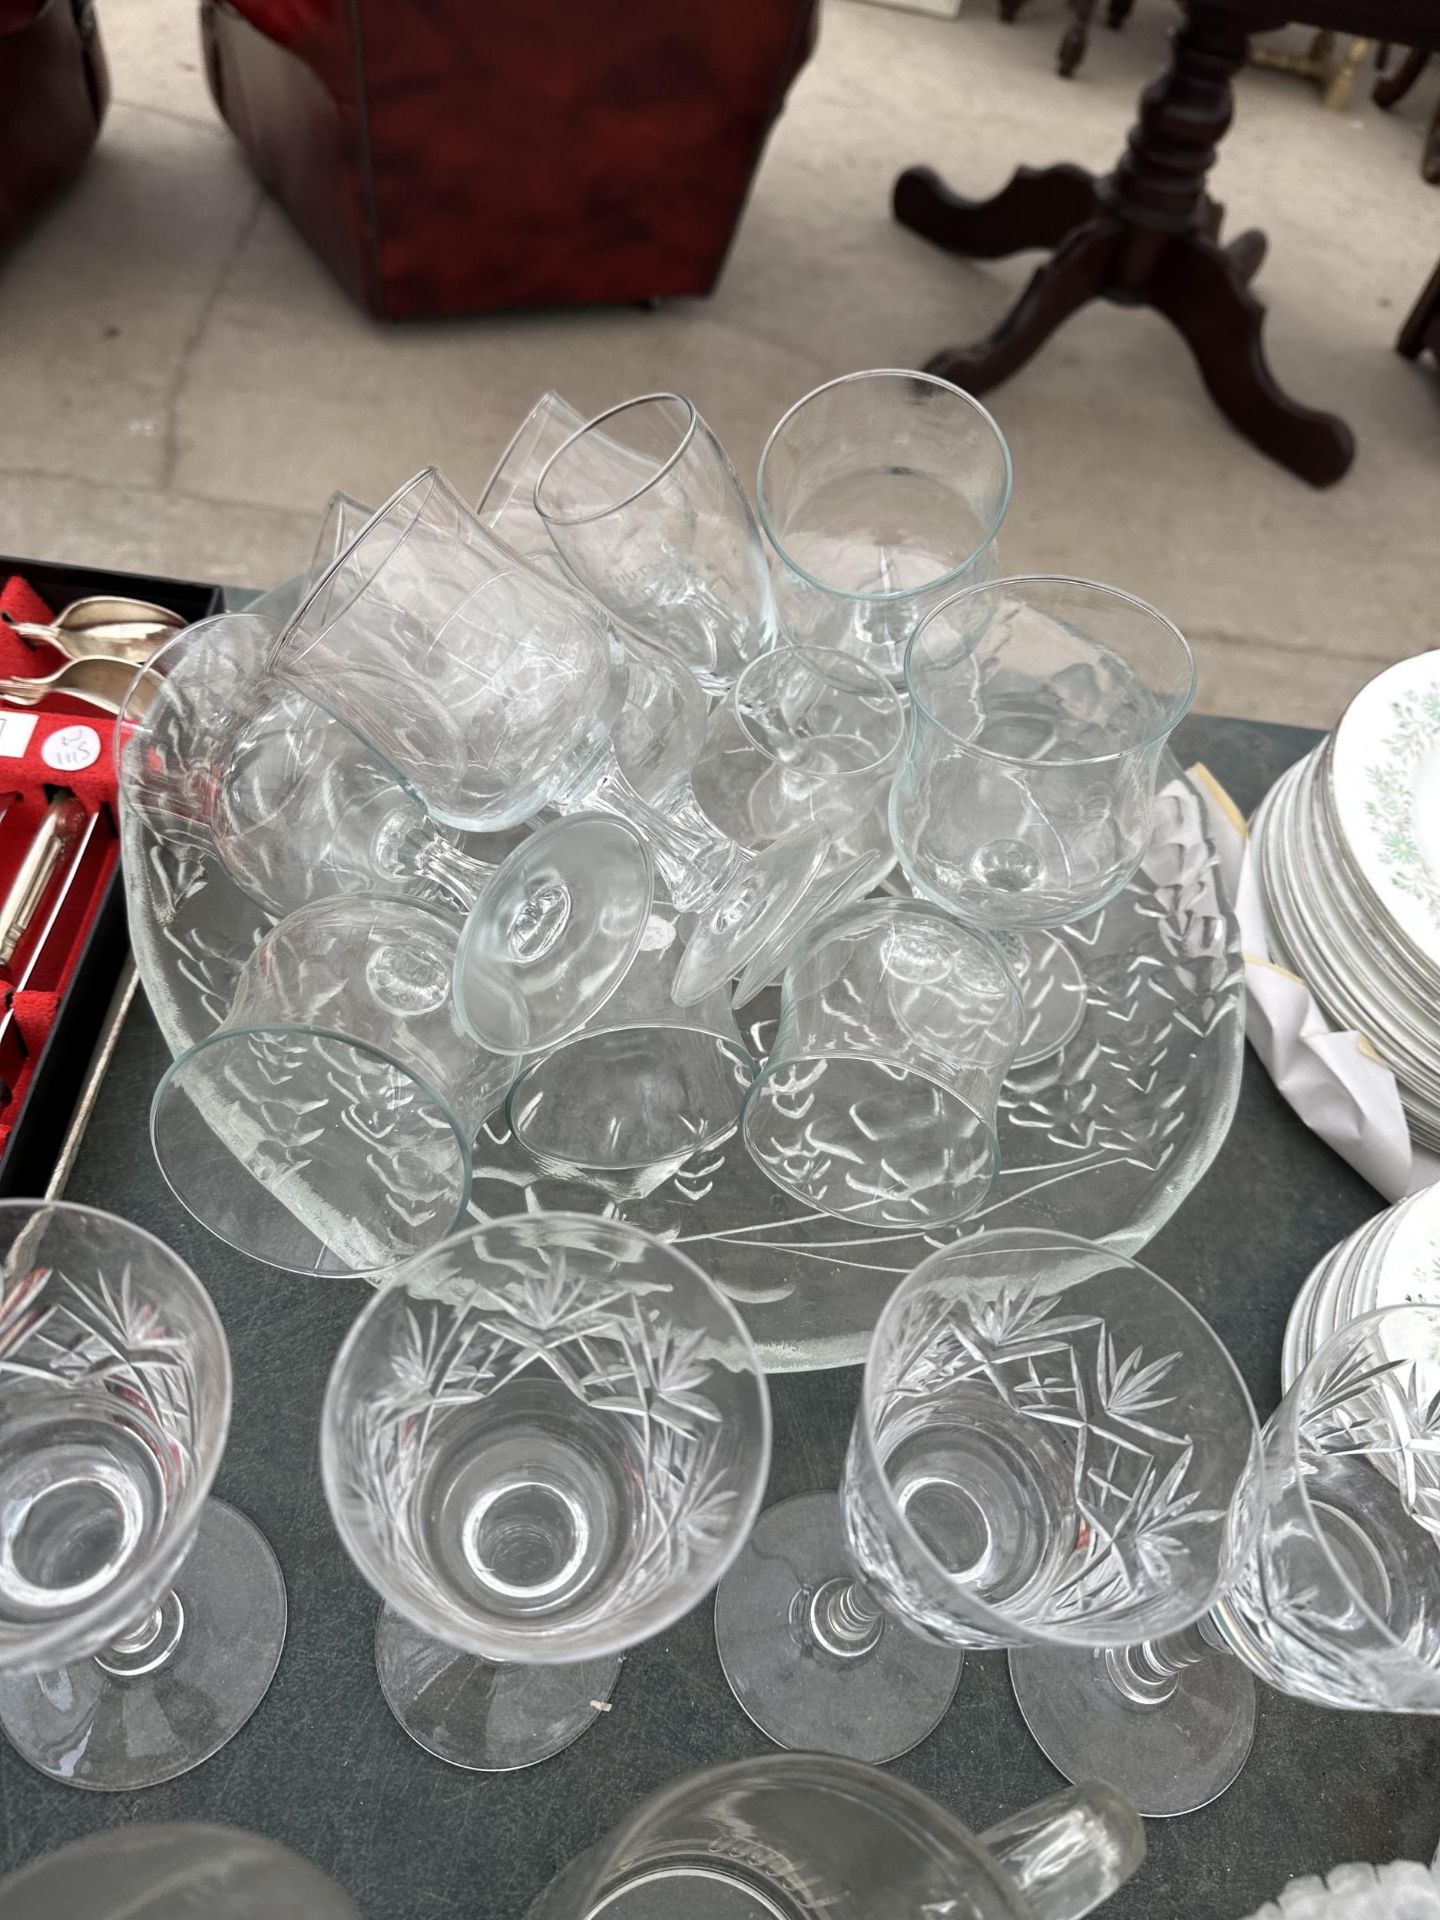 A LARGE QUANTITY OF GLASS WARE TO INCLUDE A BOWL AND WINE GLASSES - Image 2 of 3